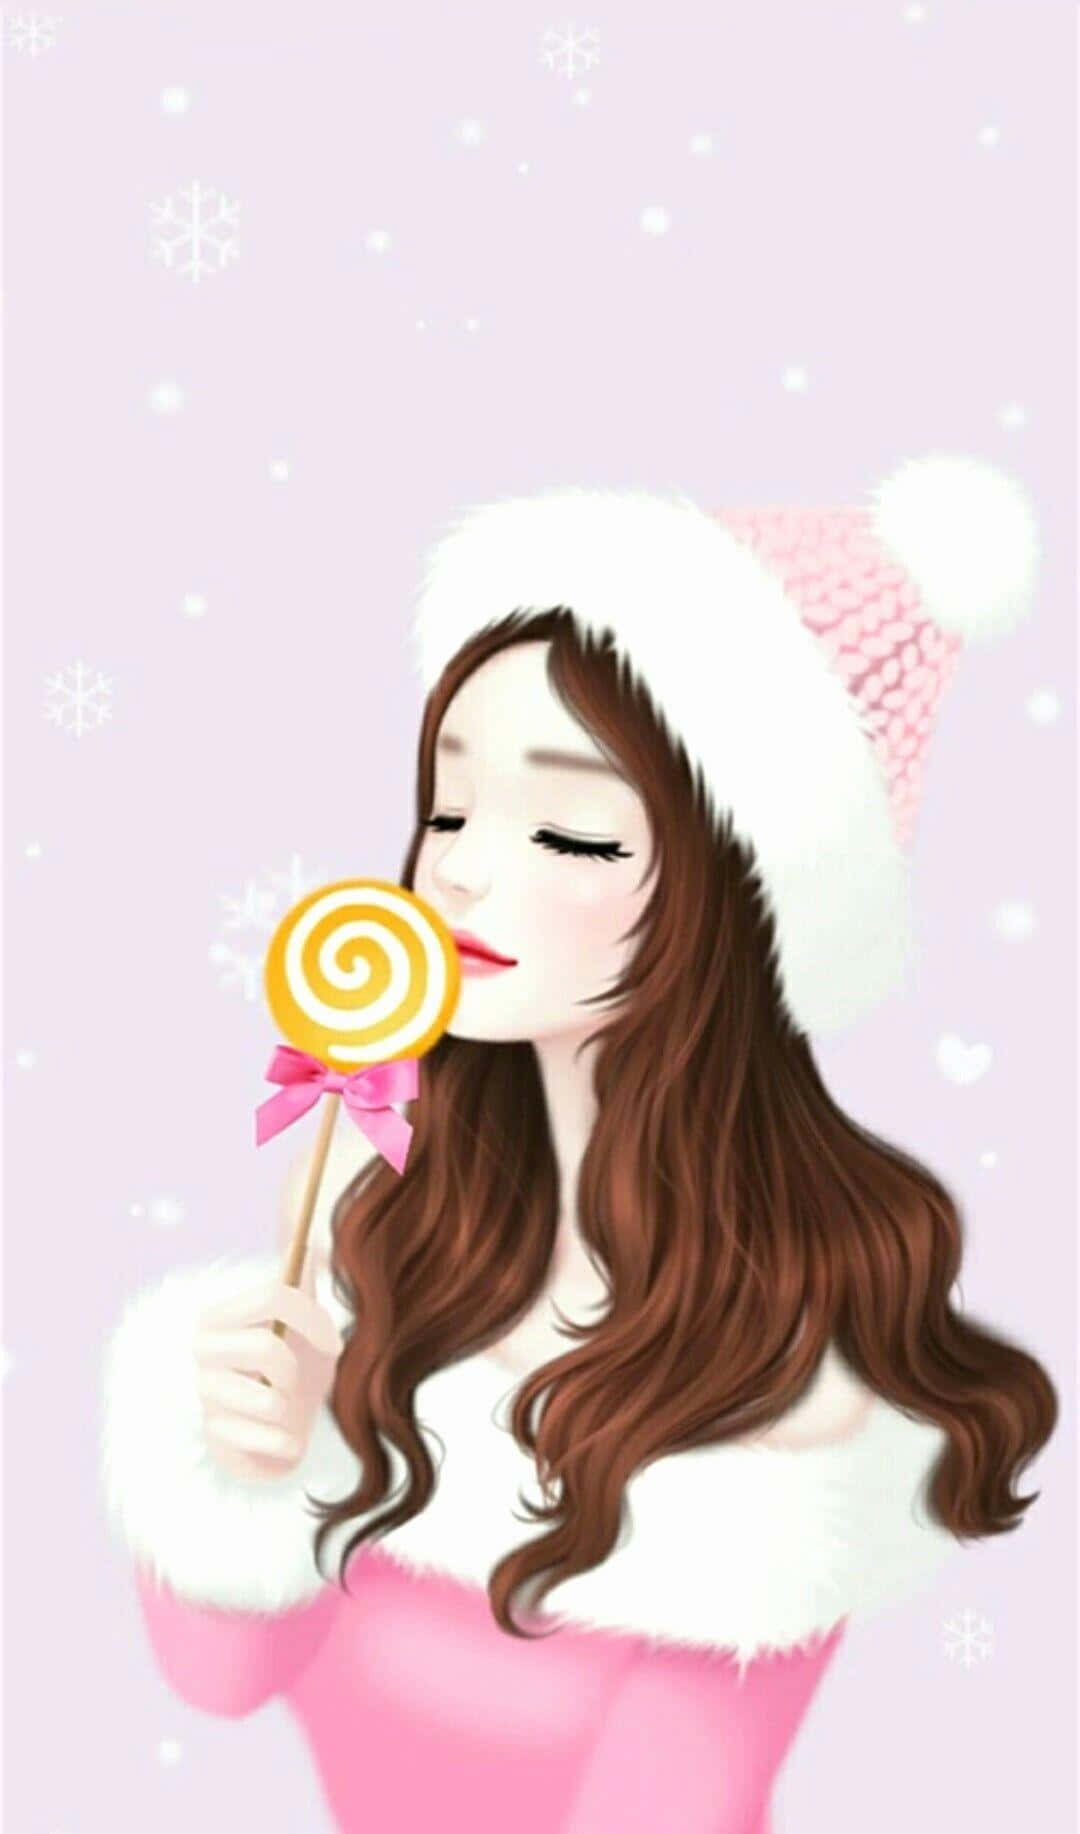 Korean Anime Girl In Pink And White Winter Outfit Wallpaper